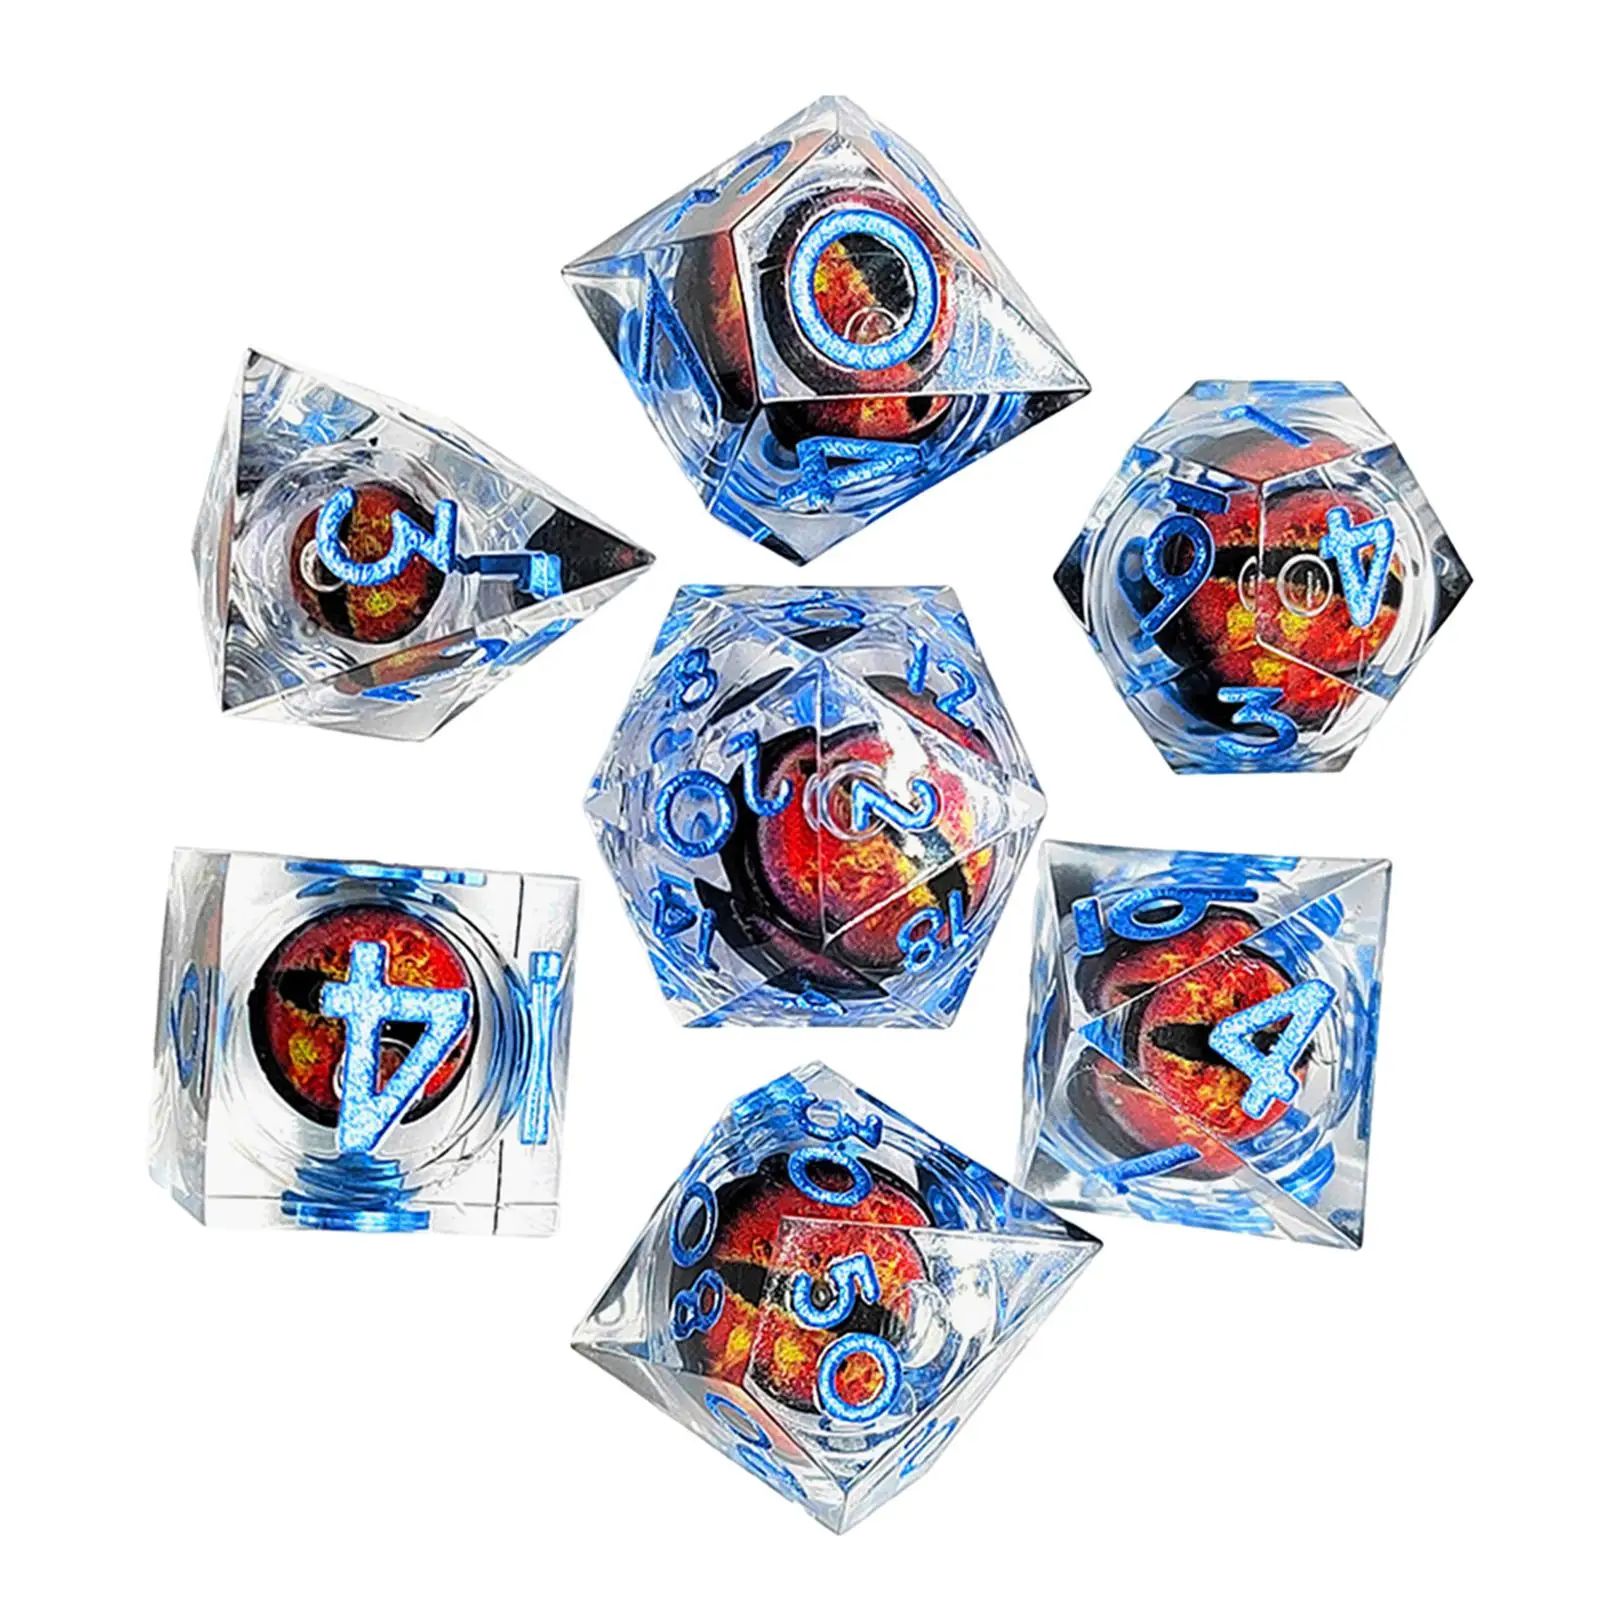 Resin Polyhedral Eye Dice 7Pcs Set Portable Exquisite Workmanship Reusable Versatile Accessories for Dice Collecting